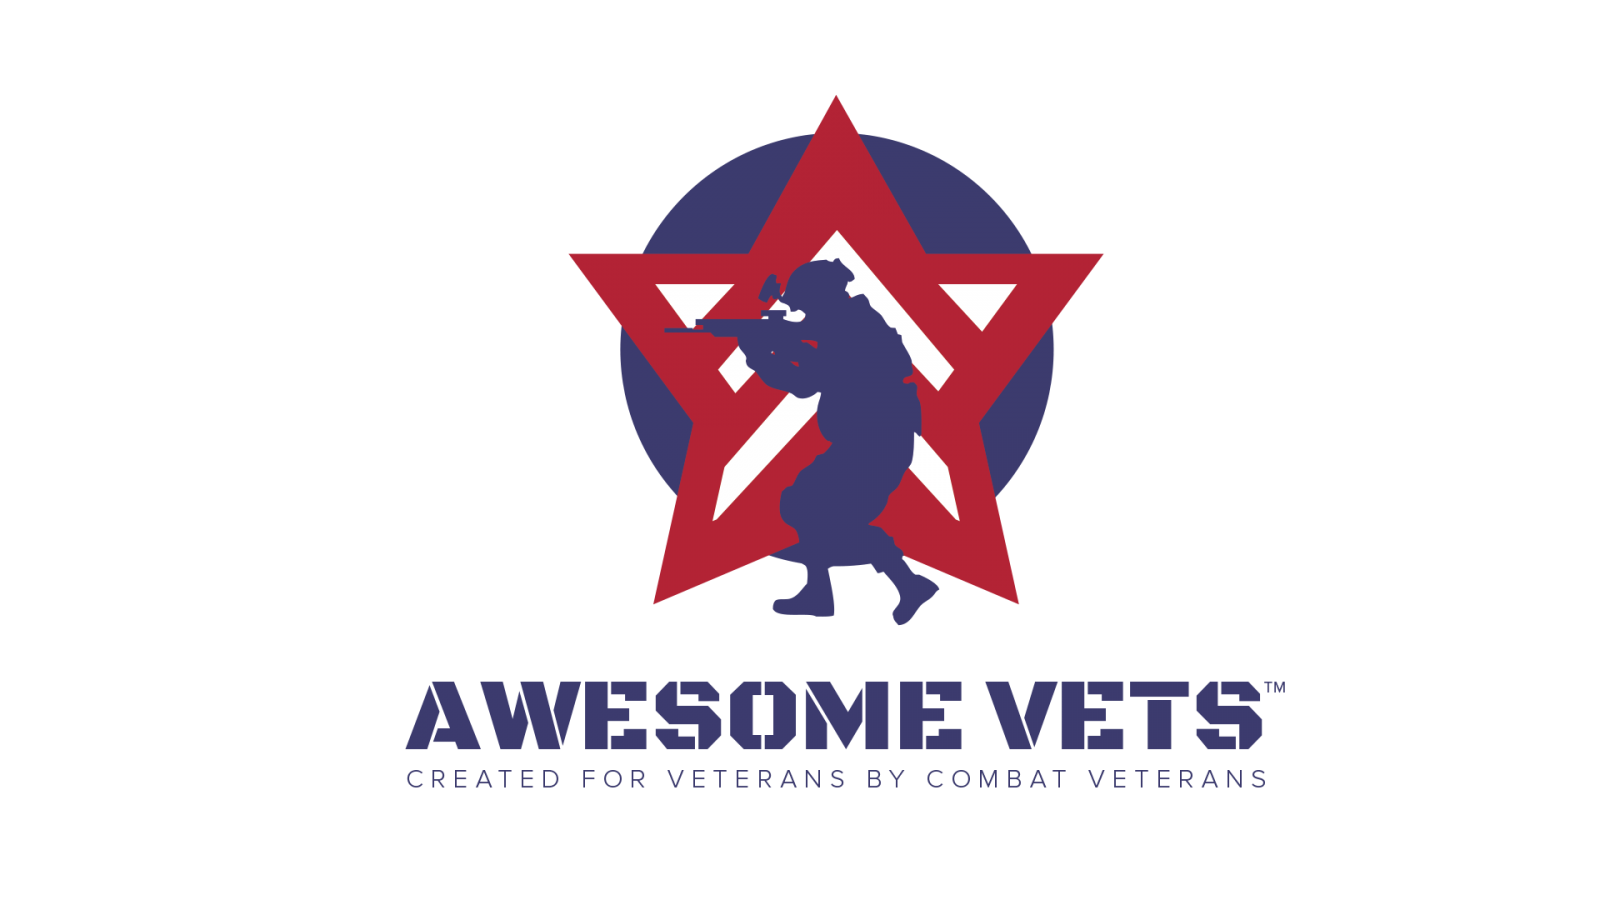 Awesome Vets front print logo with no stars